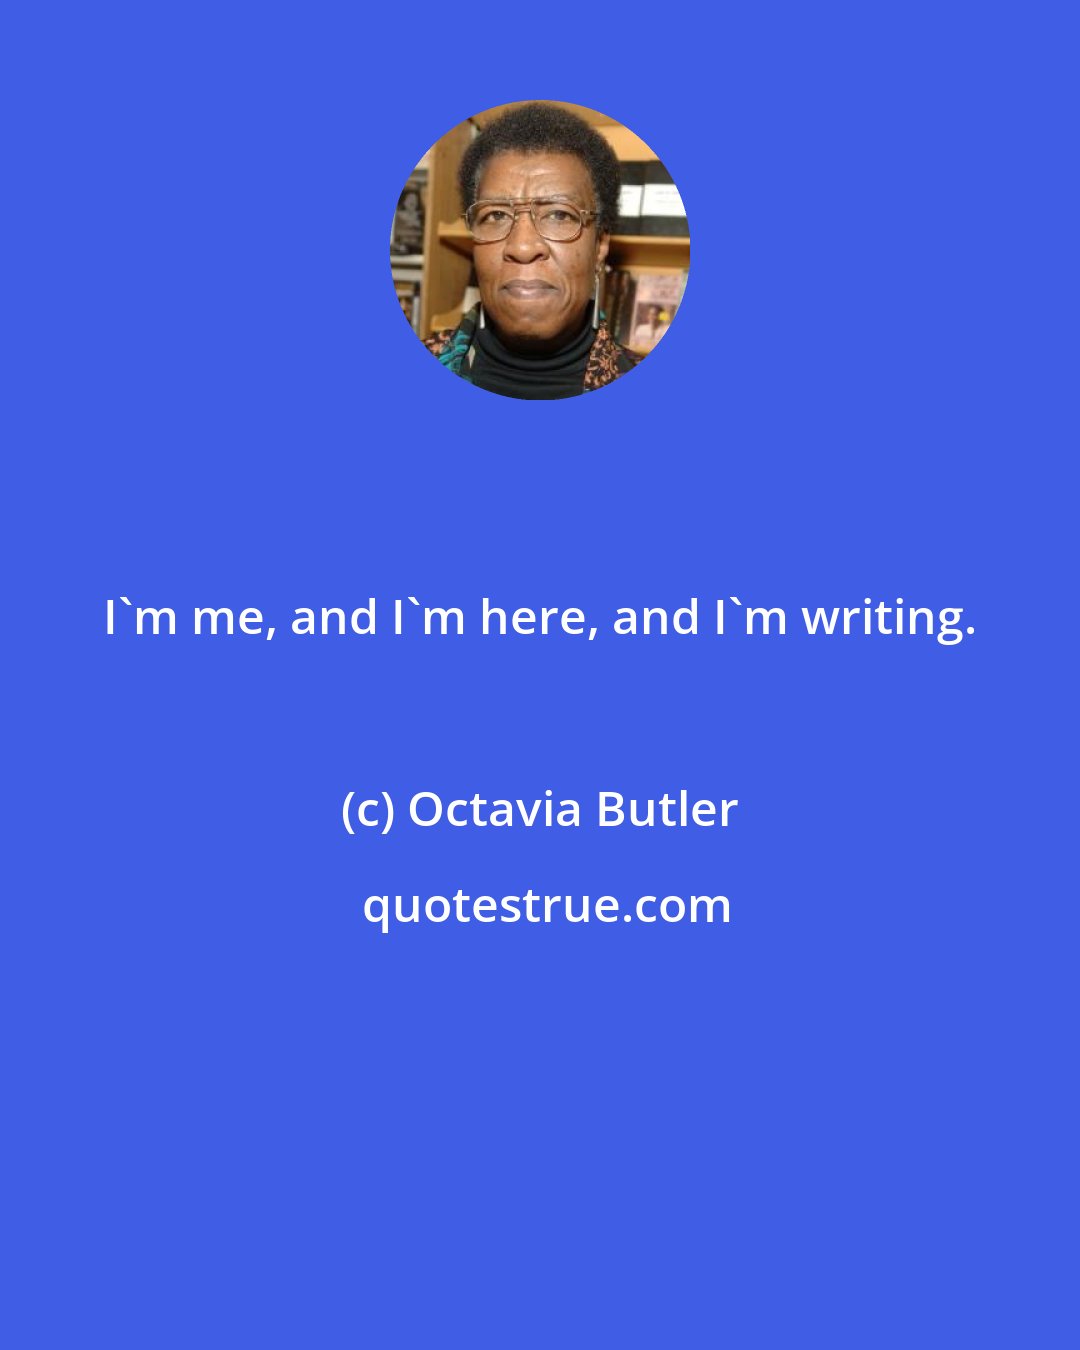 Octavia Butler: I'm me, and I'm here, and I'm writing.